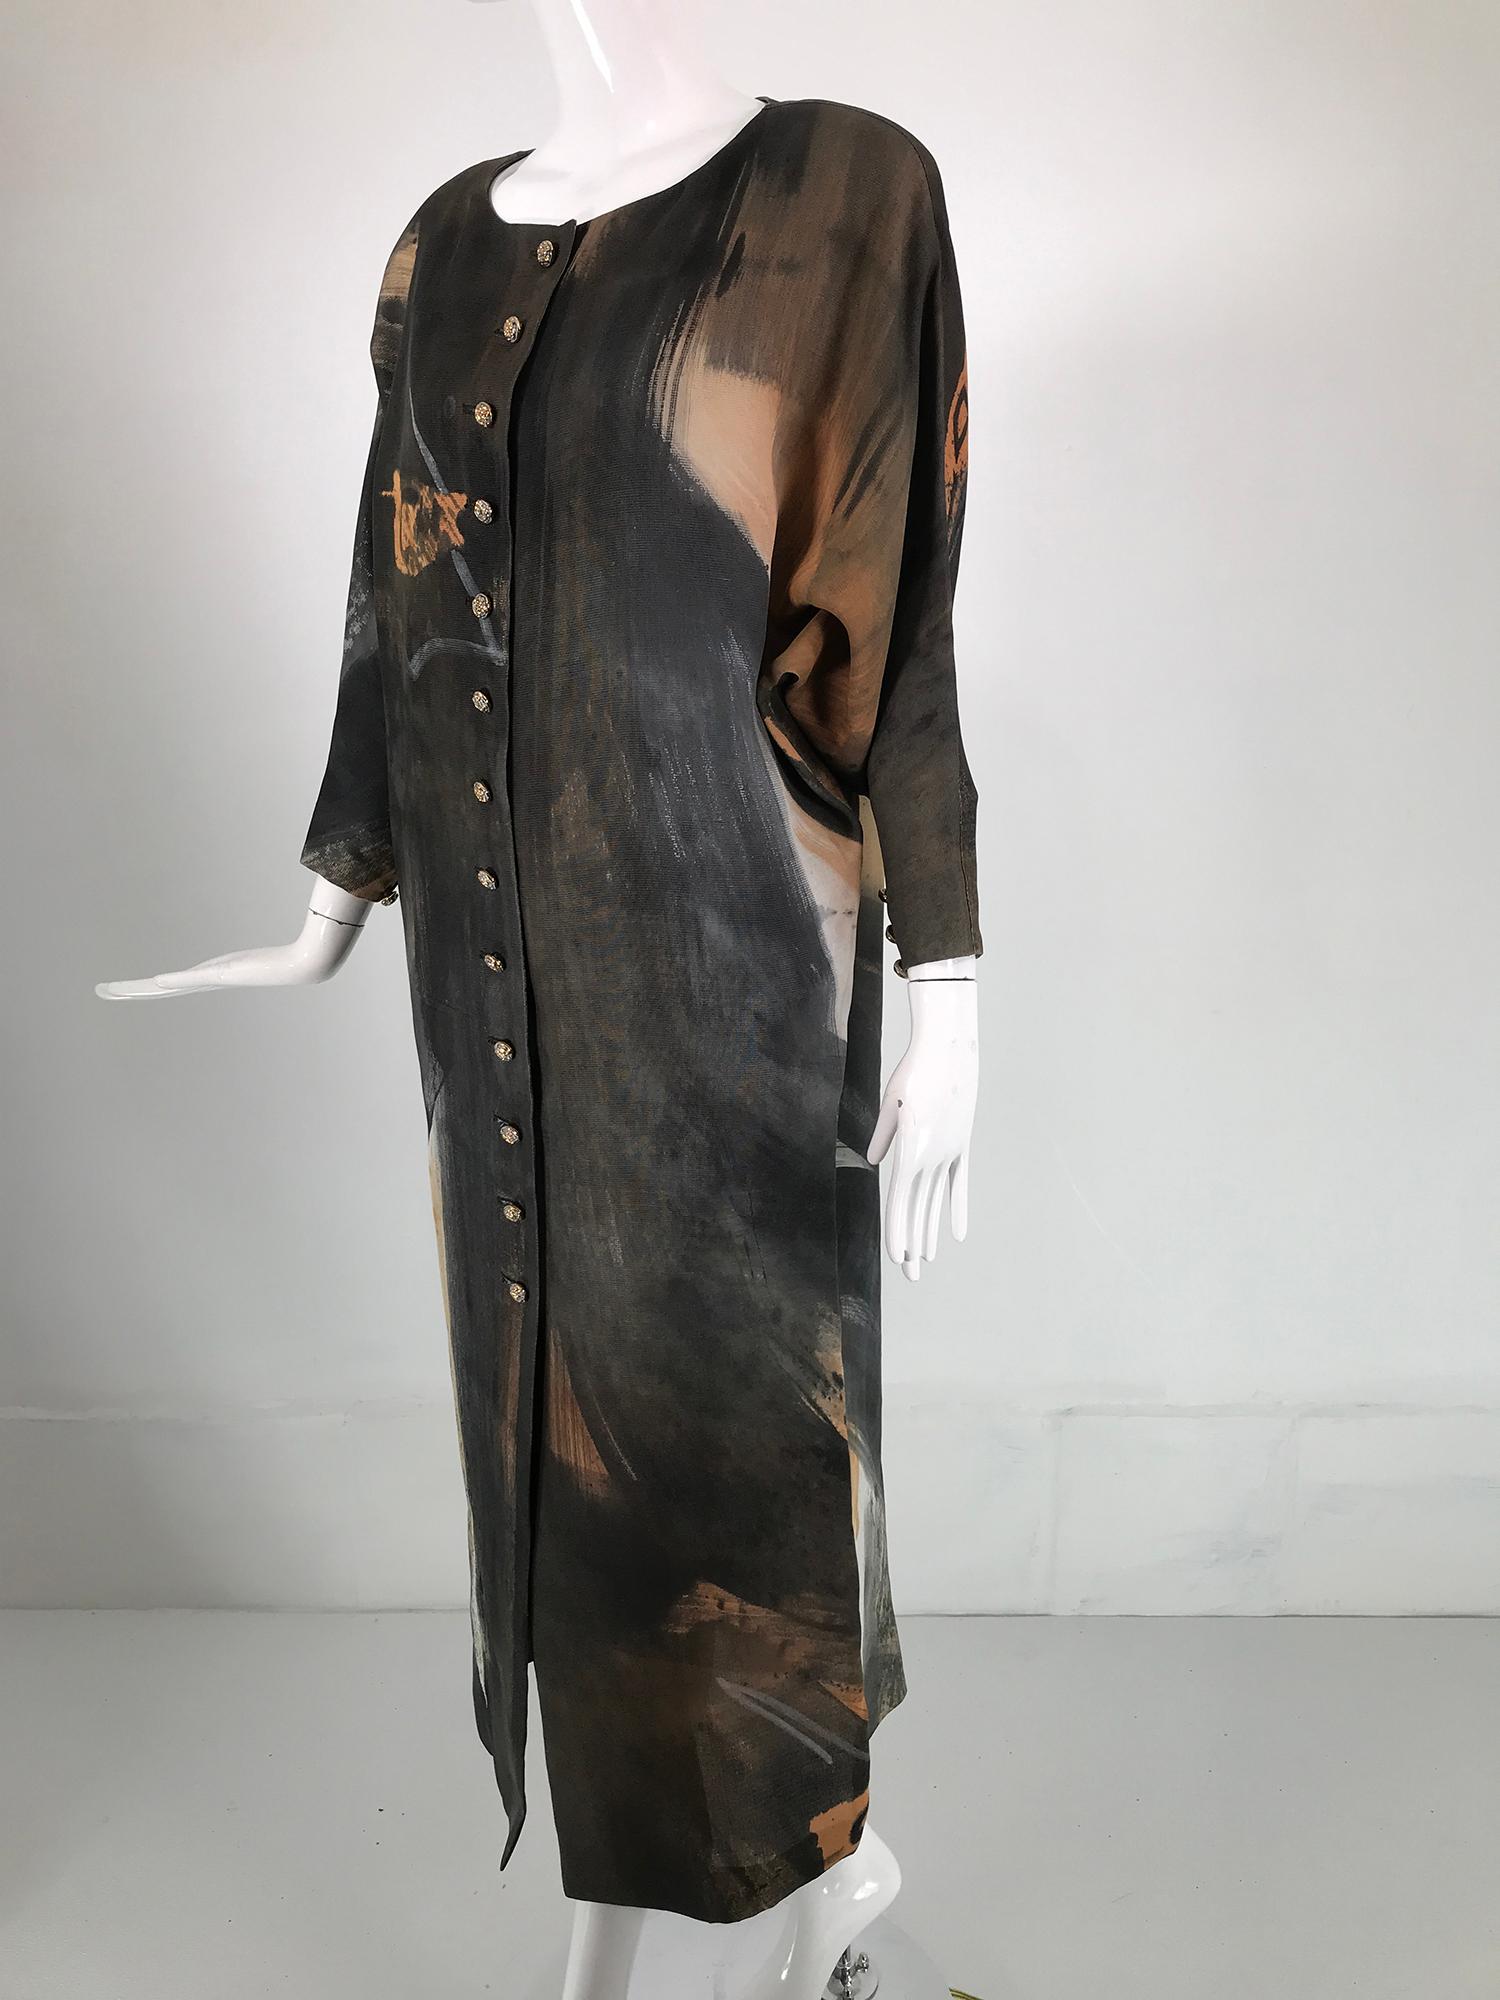 Christian Lacroix painted silk button front, bat wing dress from the 1980s. Textured silk with a modern painted design, this is a very unusual dress & not typical of Lacroix. Oval open neckline with bat wing sleeves, large shoulder pads, the sleeves